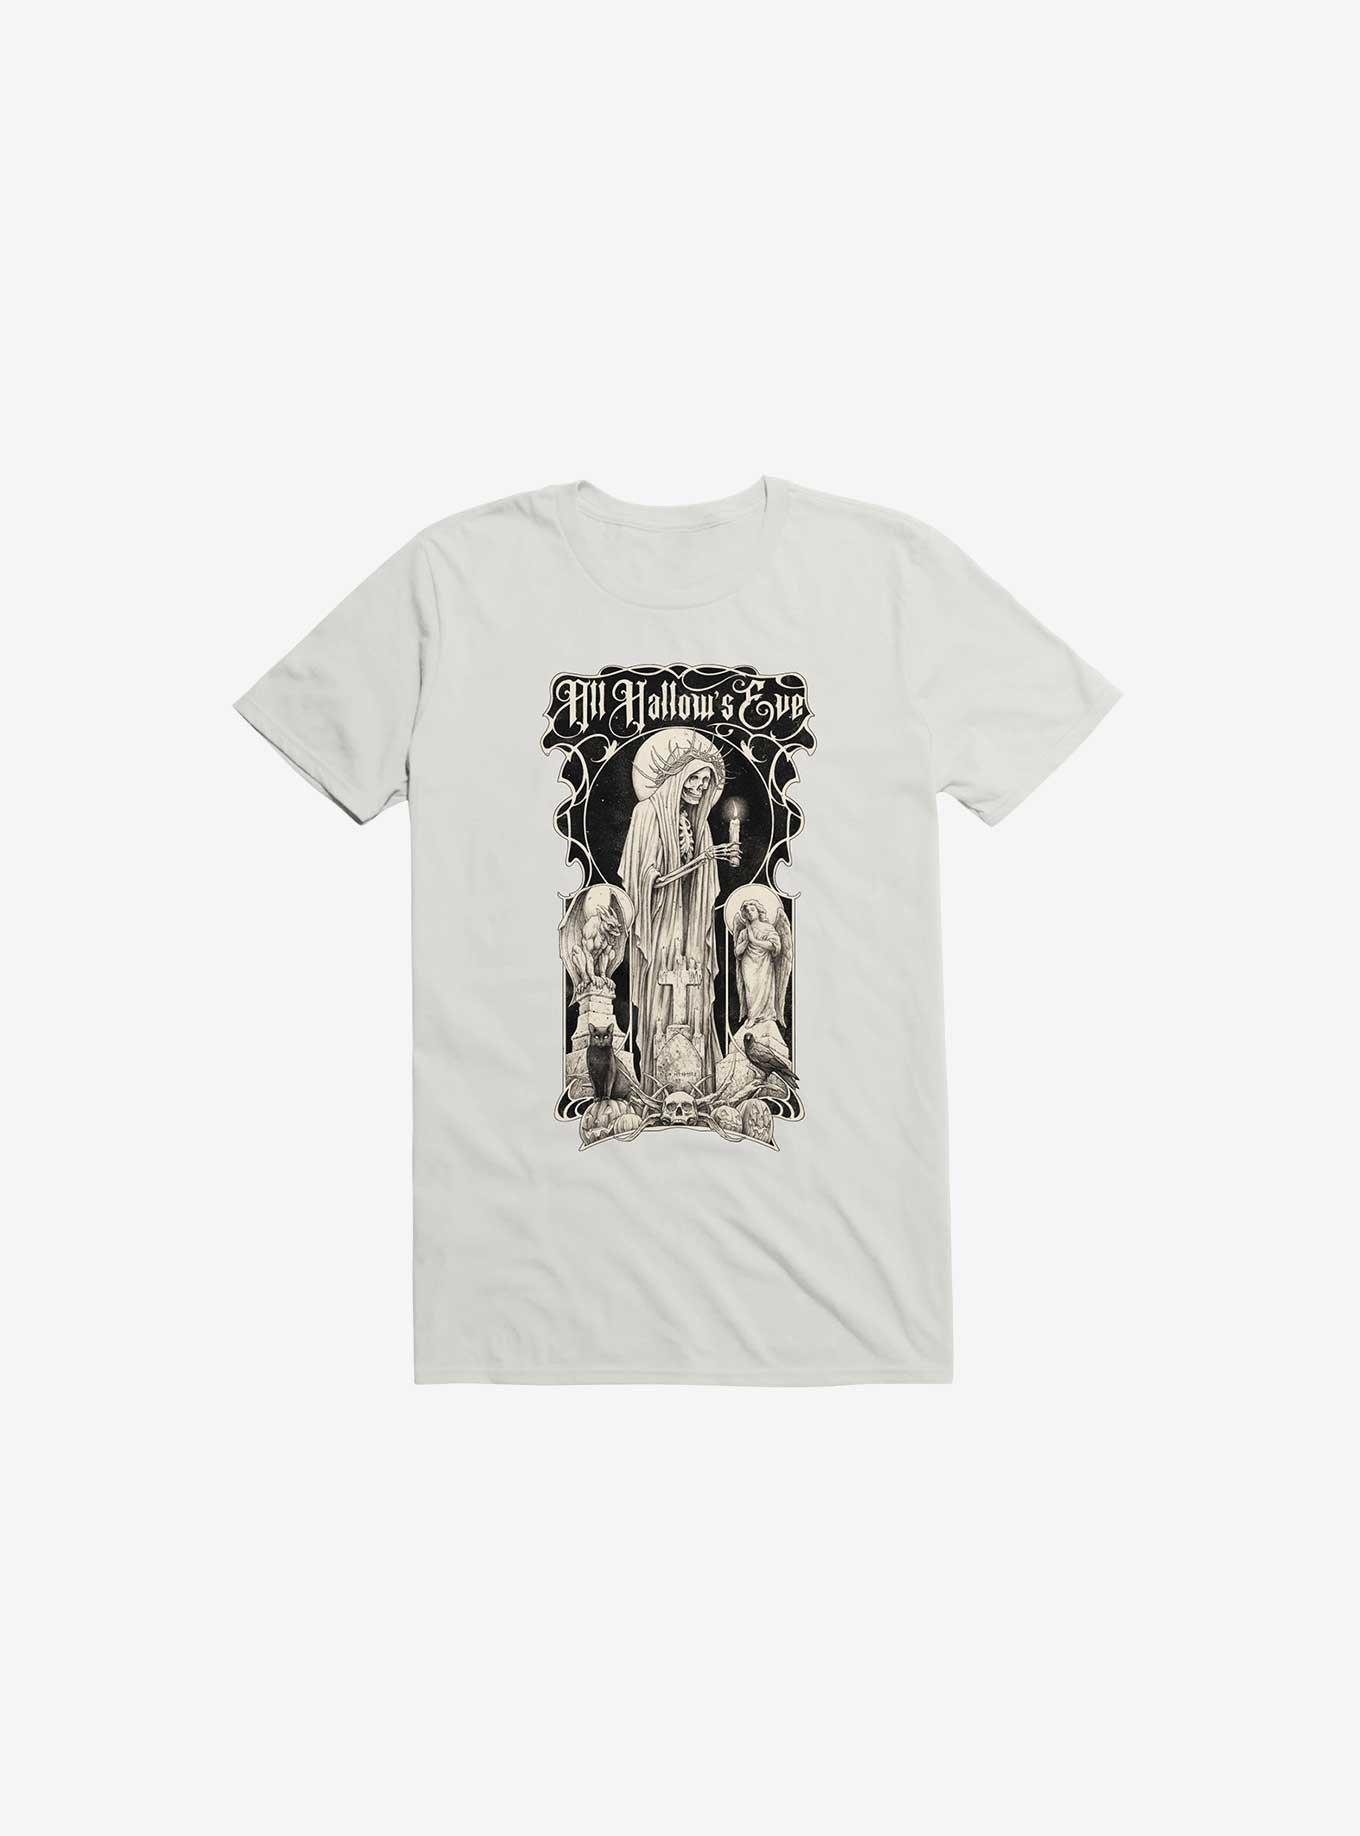 All Hallow's Eve White T-Shirt - WHITE | Hot Topic